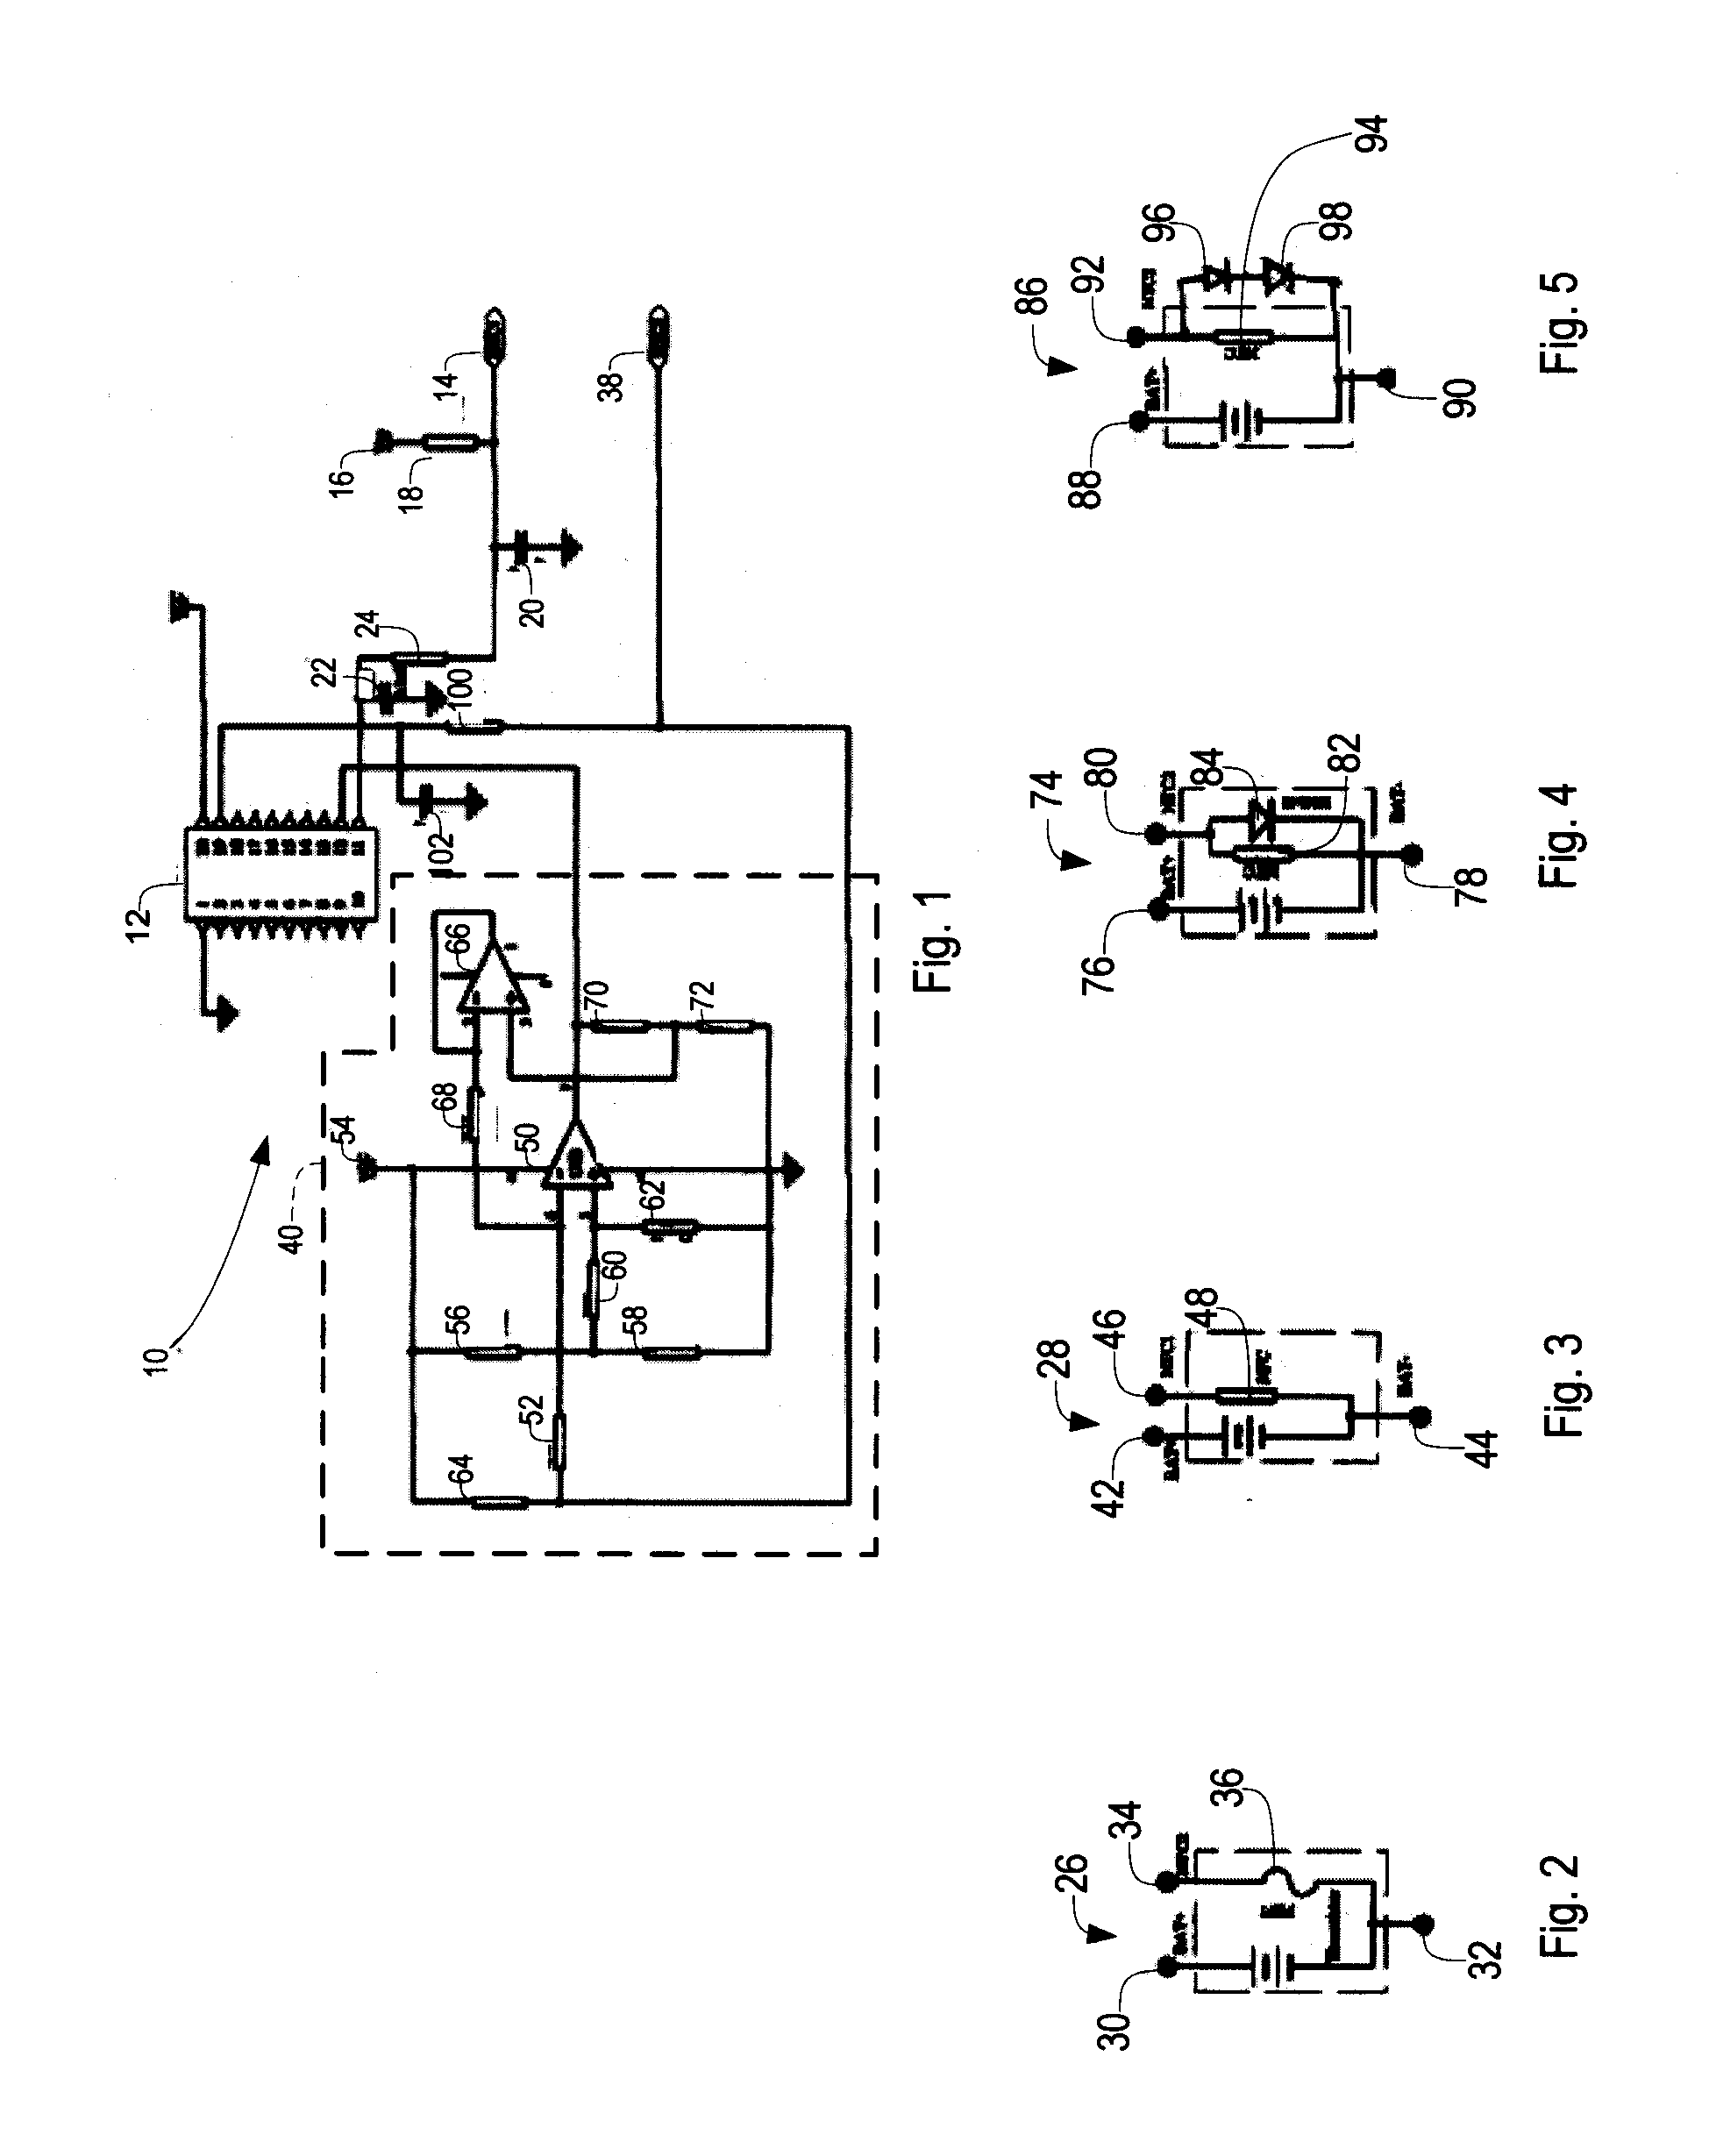 Battery charger for different capacity cells